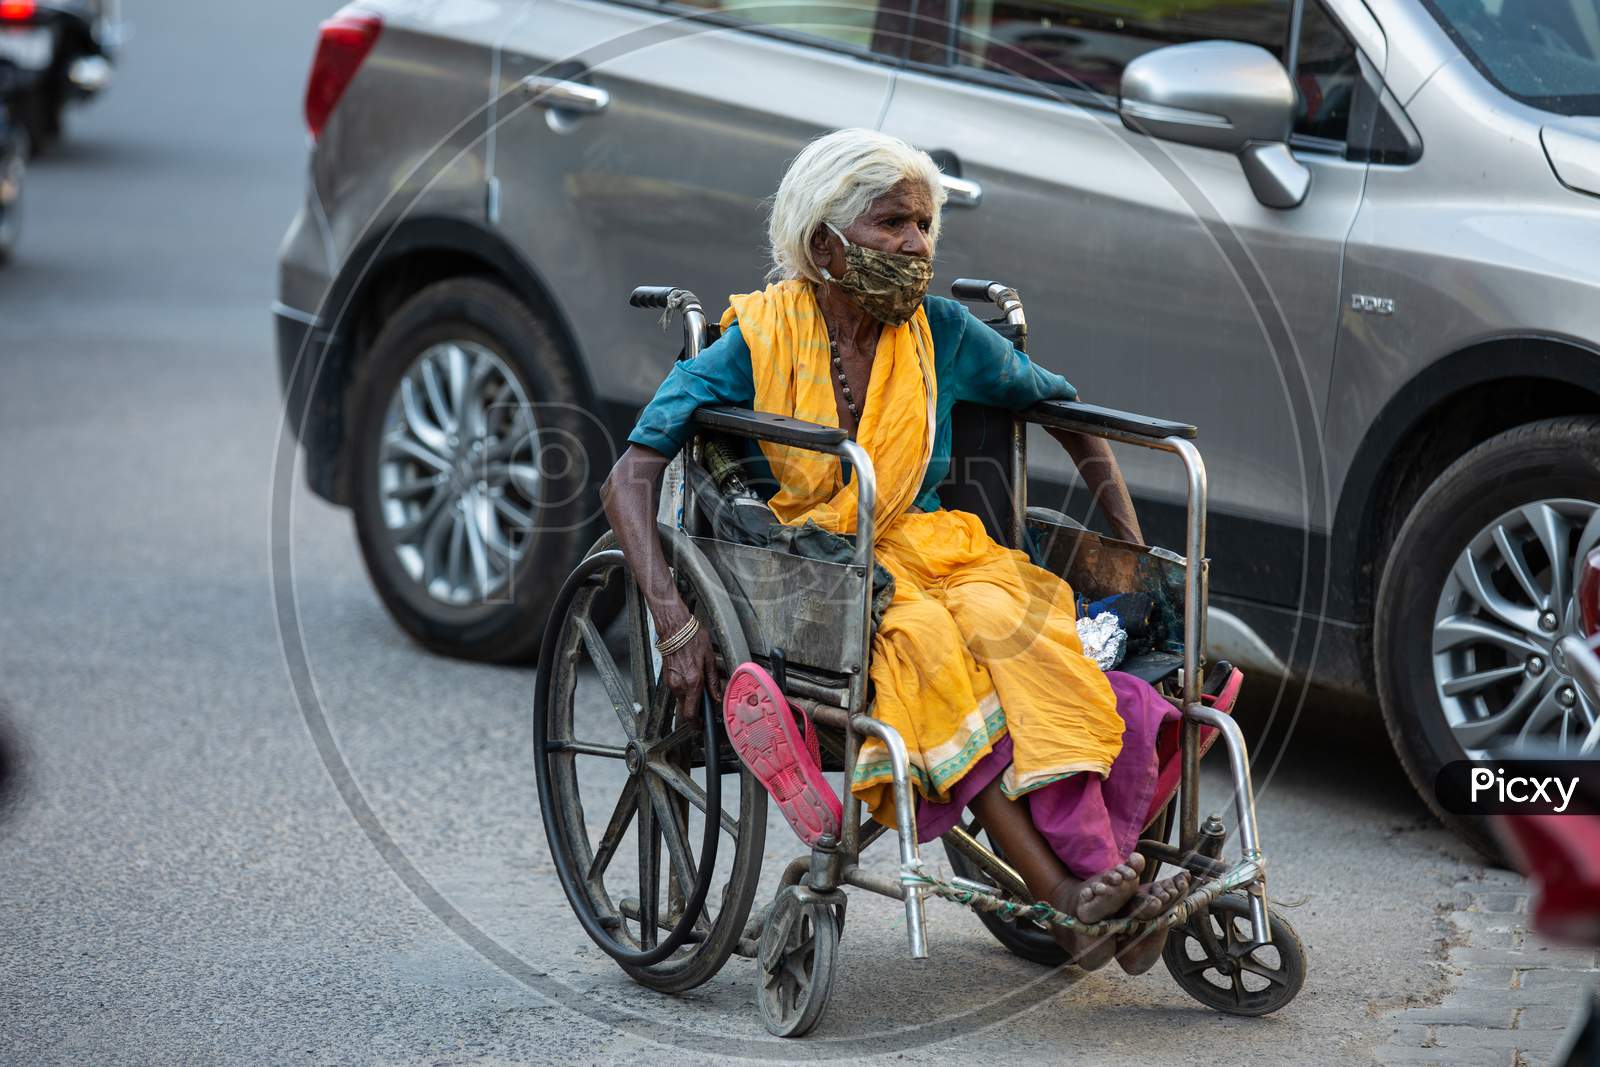 Jodhpur, Rajasthan, India - May 20 2020: Poor Helpless Handicapped Old Woman Sitting In Wheelchair Wearing Mask Roaming On Road During Covid-19 Lockdown Crisis, No Food To Eat No Place To Go.